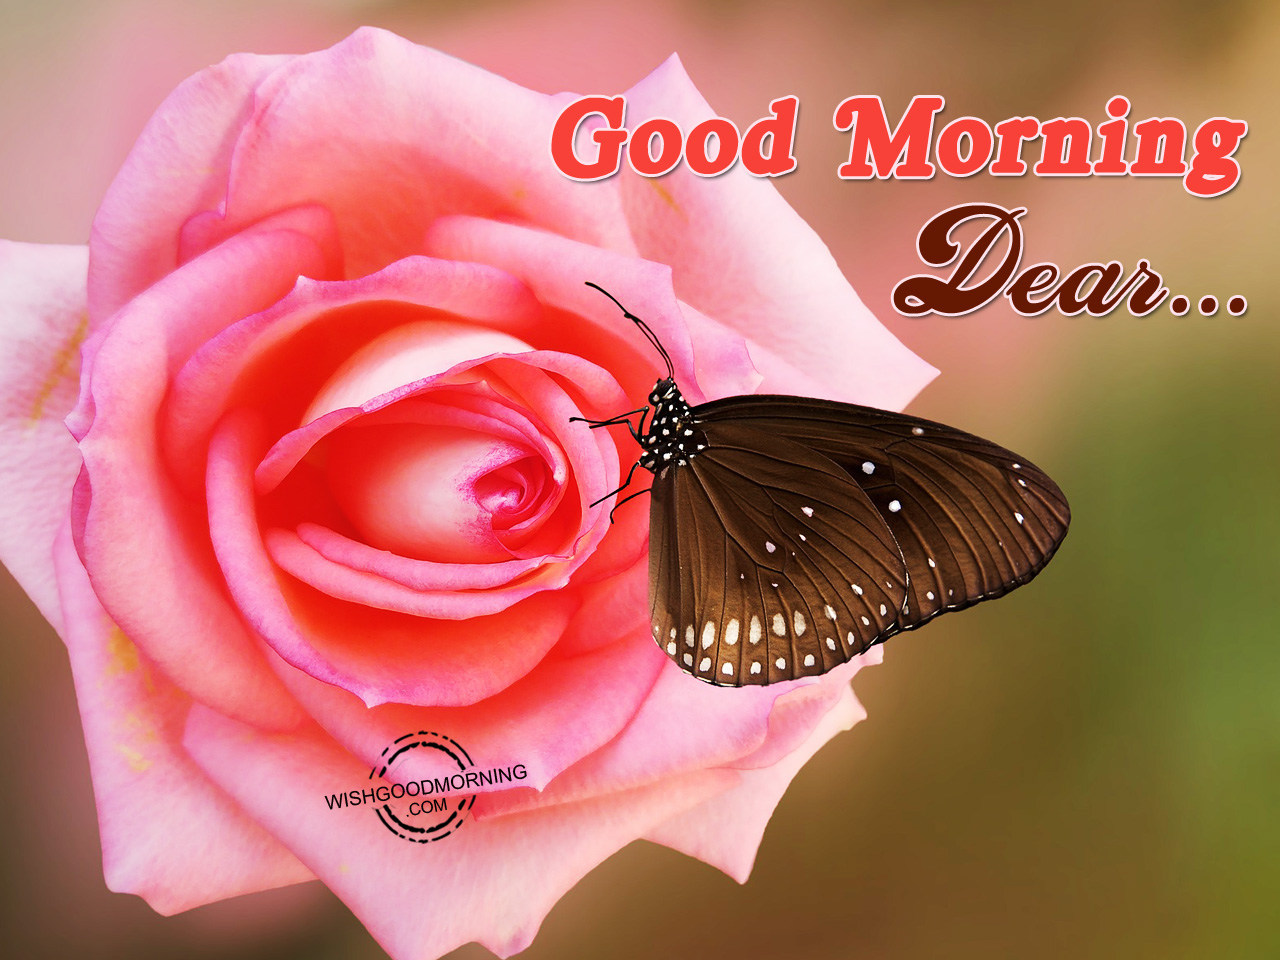 Good Morning Dear - Good Morning Pictures – WishGoodMorning.com